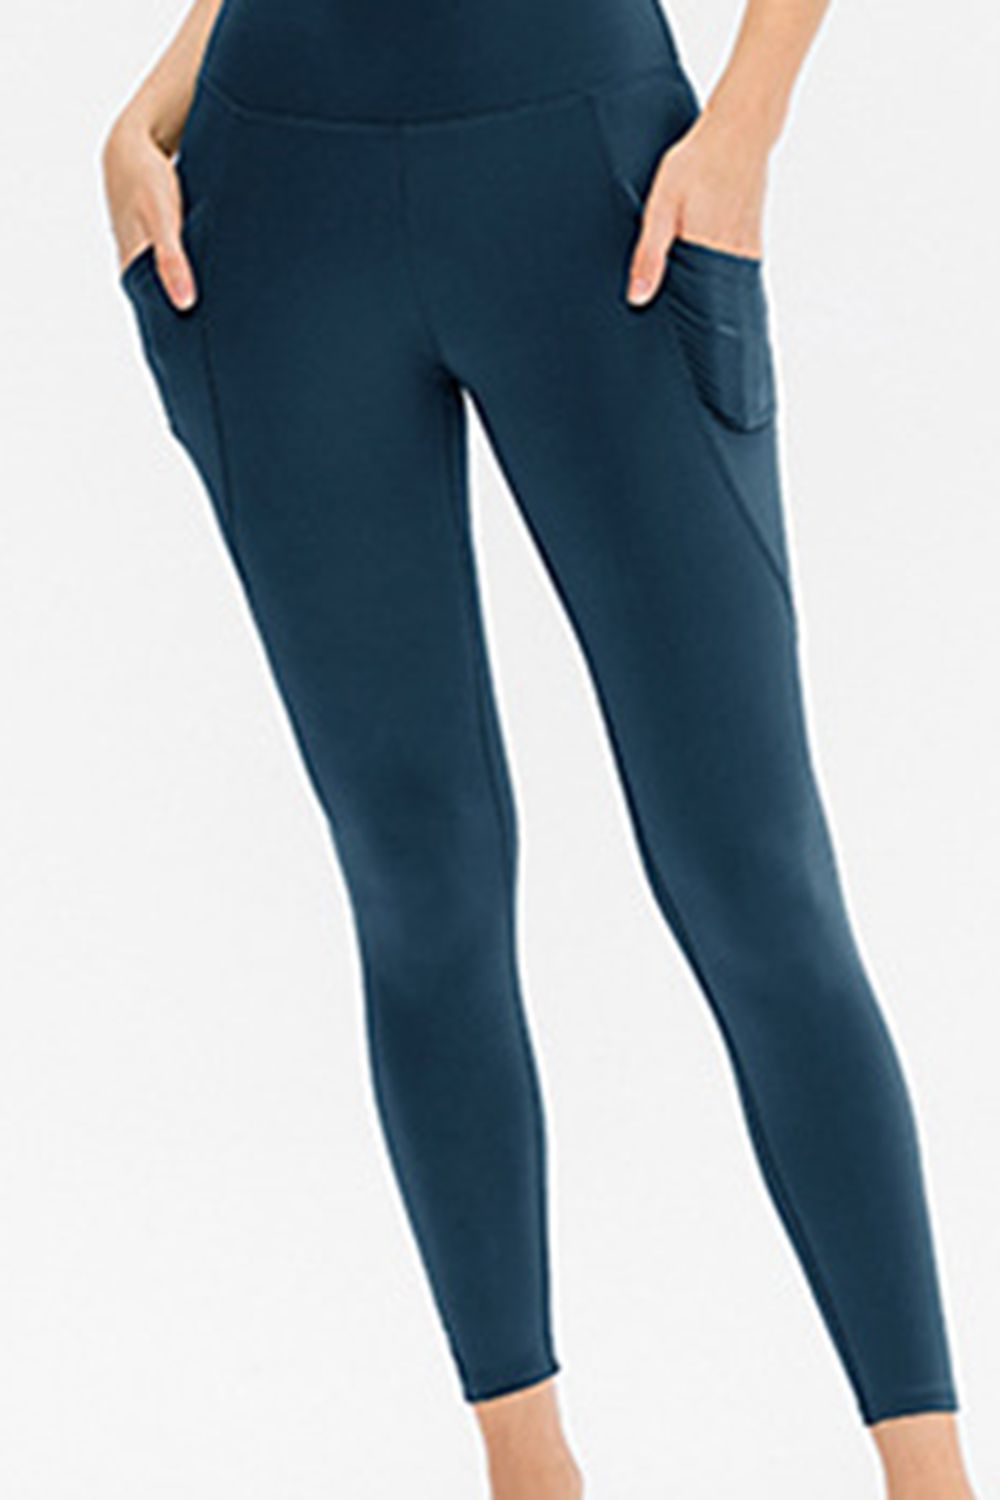 Joelle Slim Fit Long Active Leggings with Pockets